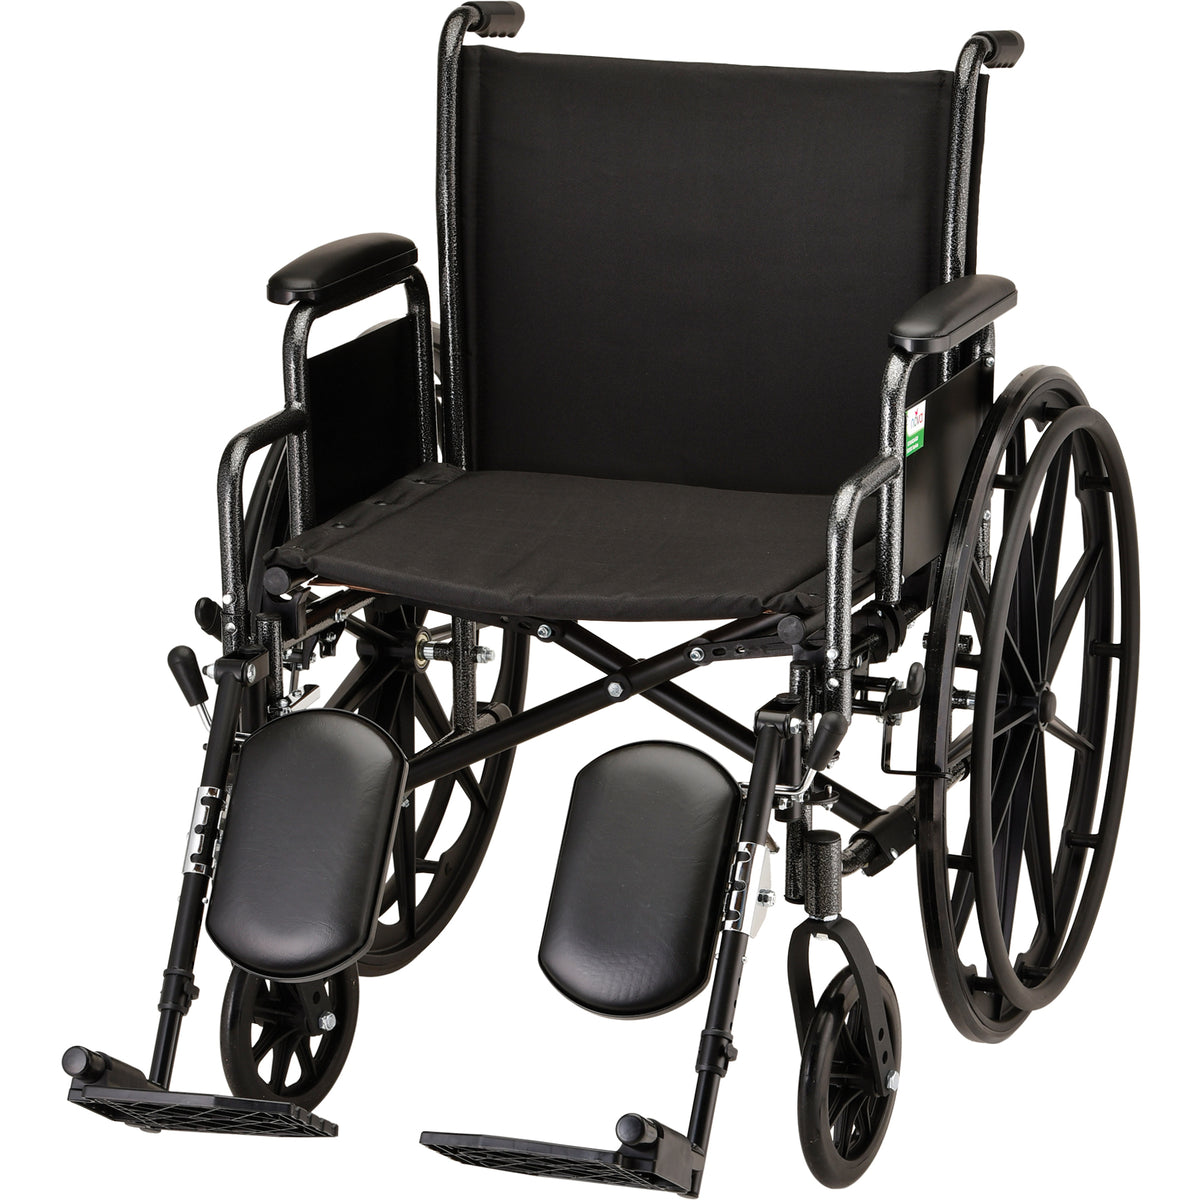 Nova 20 inch Steel Wheelchair with Detachable Desk Arms and Footrests